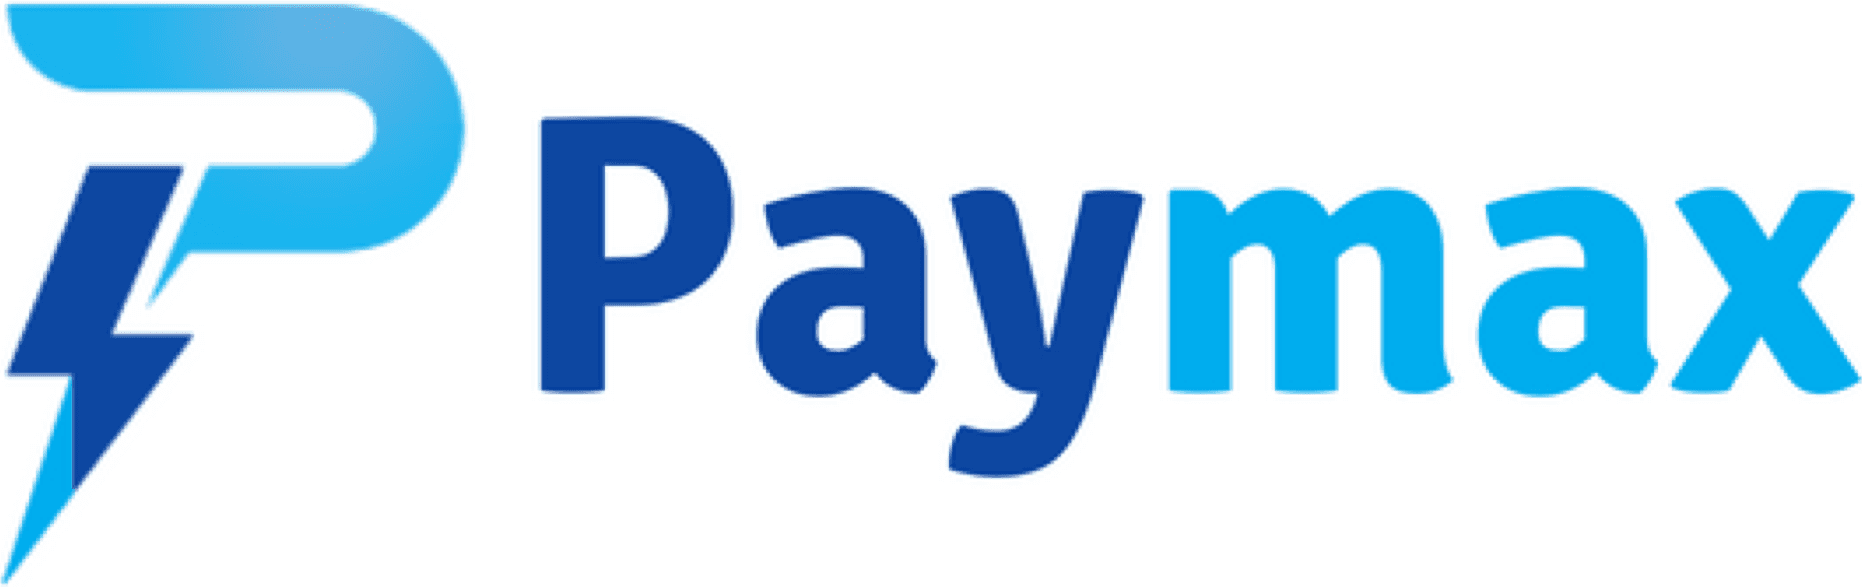 Paymax